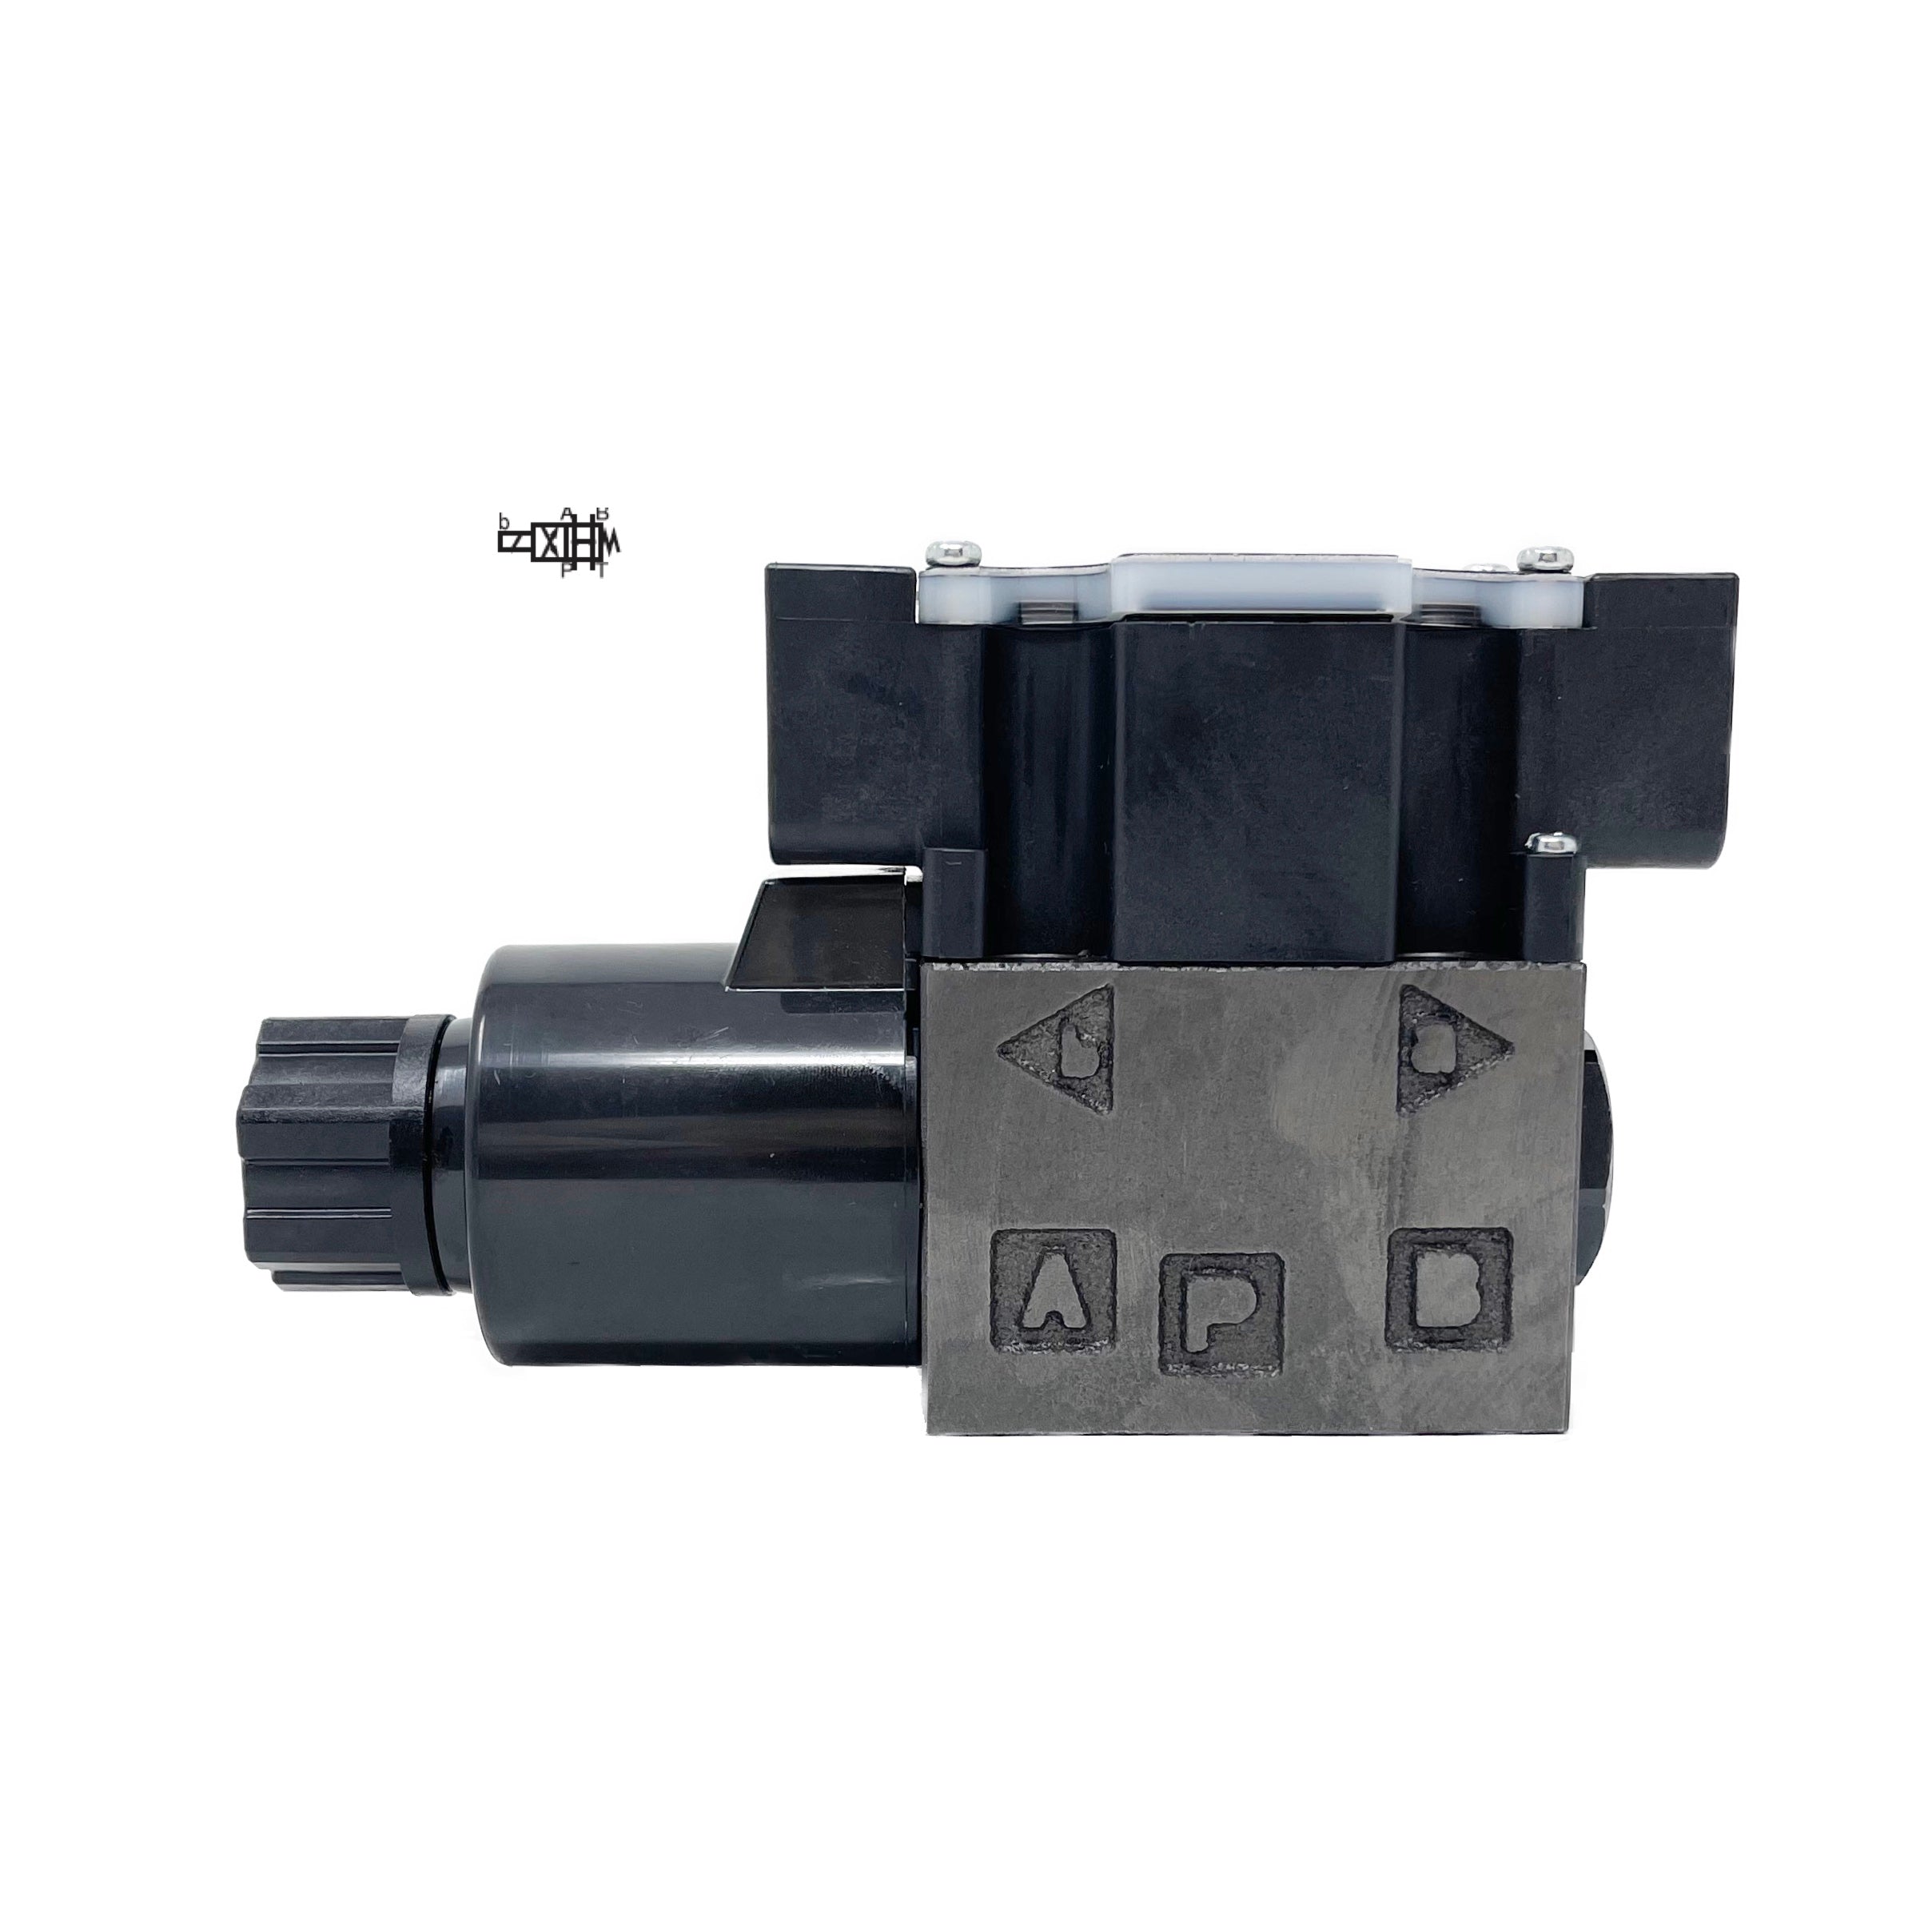 SS-G01-A4-R-C115-E31 : Nachi Solenoid Valve, 2P4W, D03 (NG6), 13.2GPM, 5075psi, All Ports Open Neutral, 110 VAC, Wiring Box with Lights